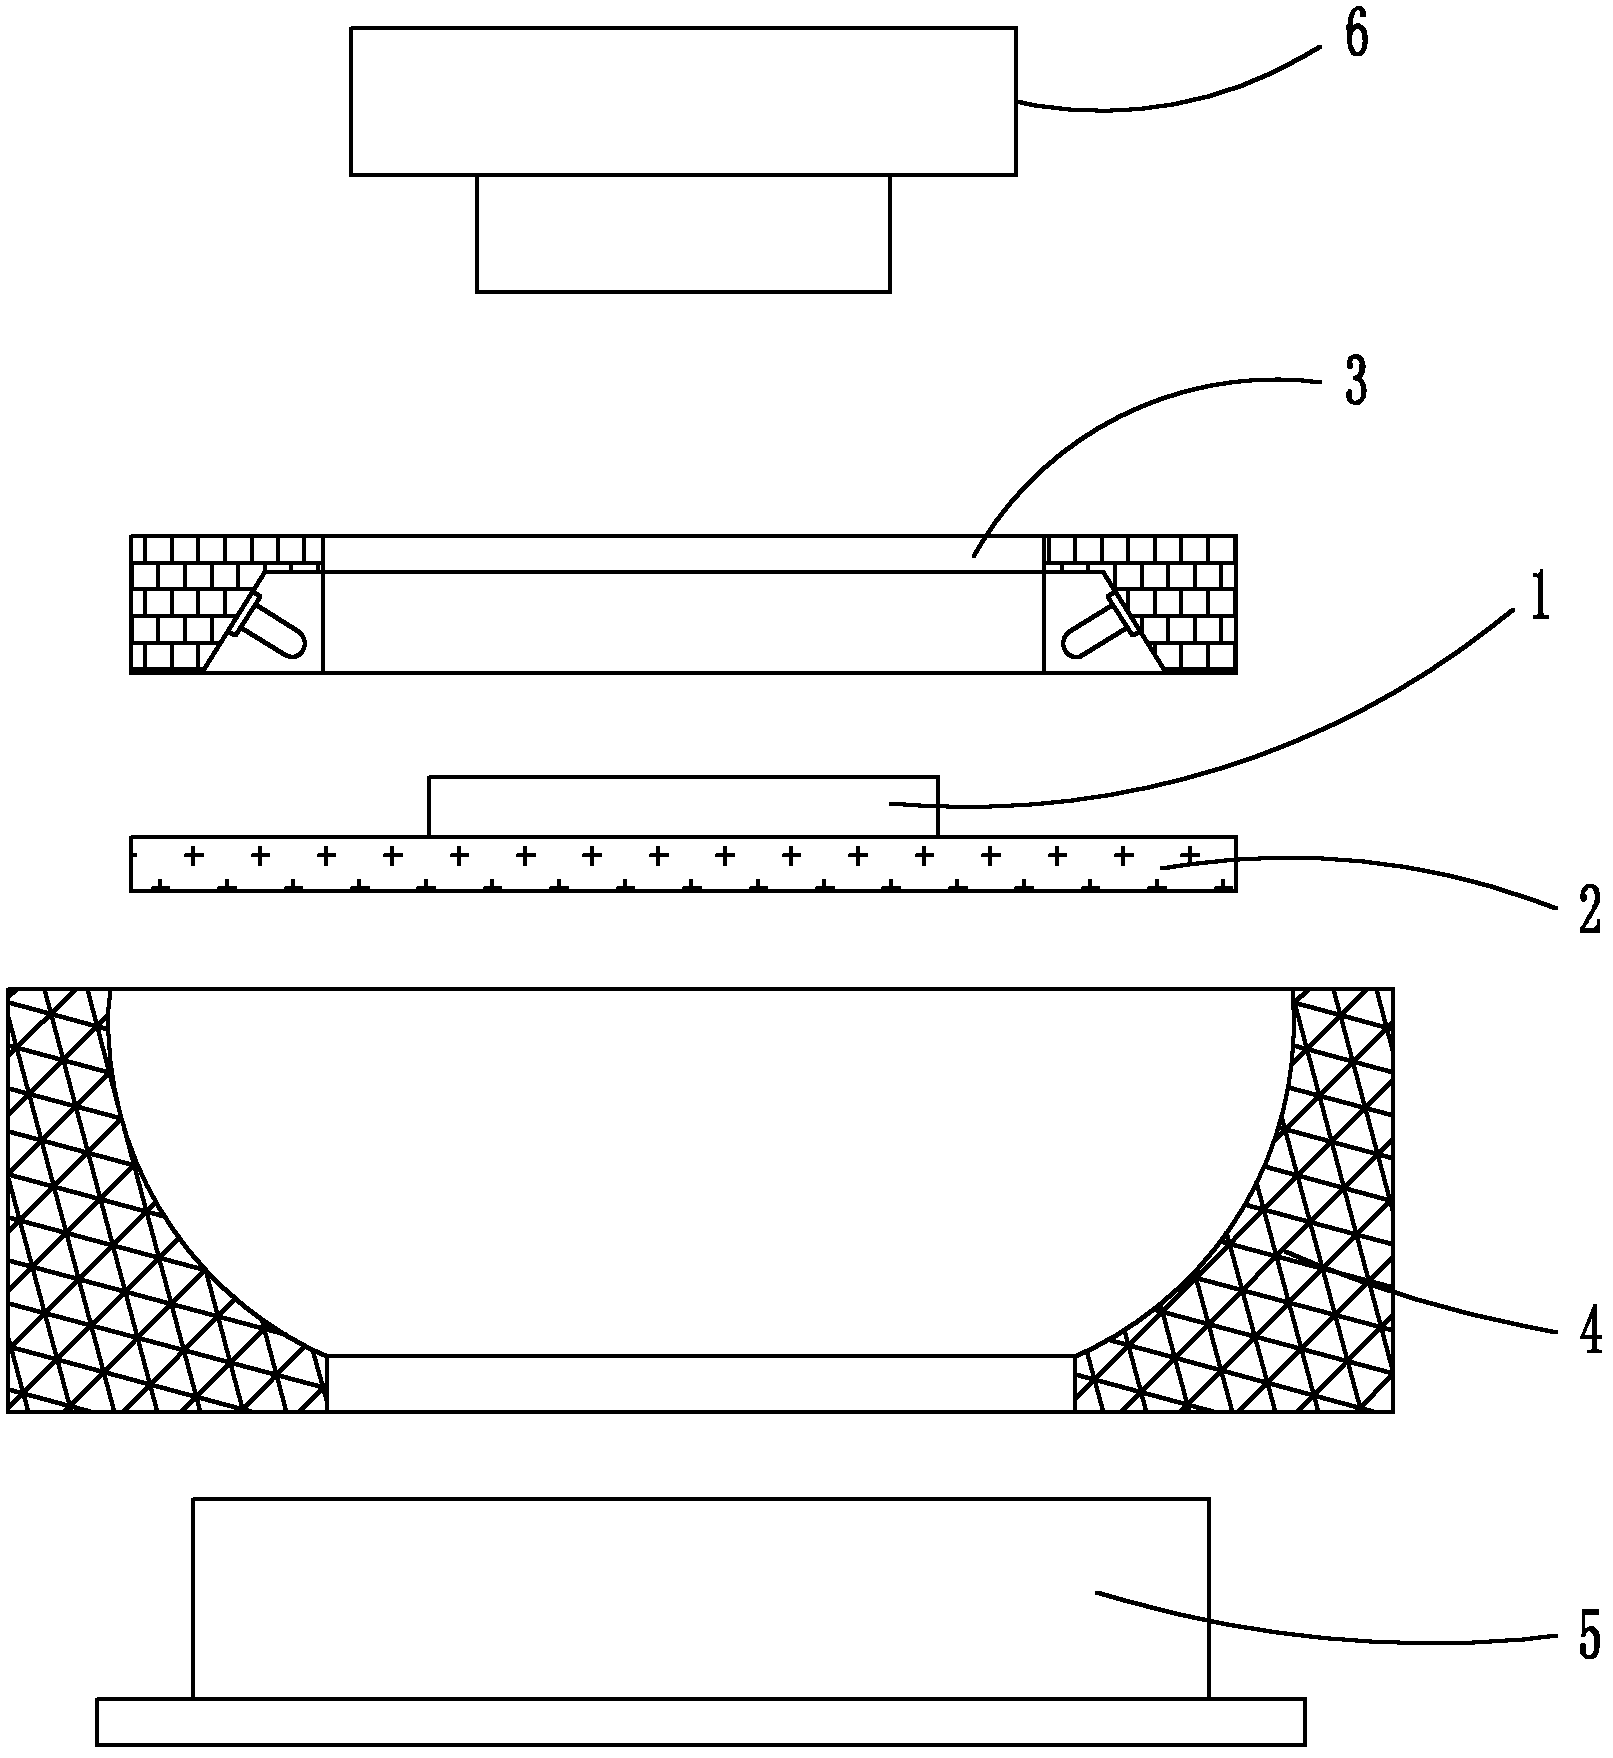 Optical system for detecting vertical surface and outline of coin on line